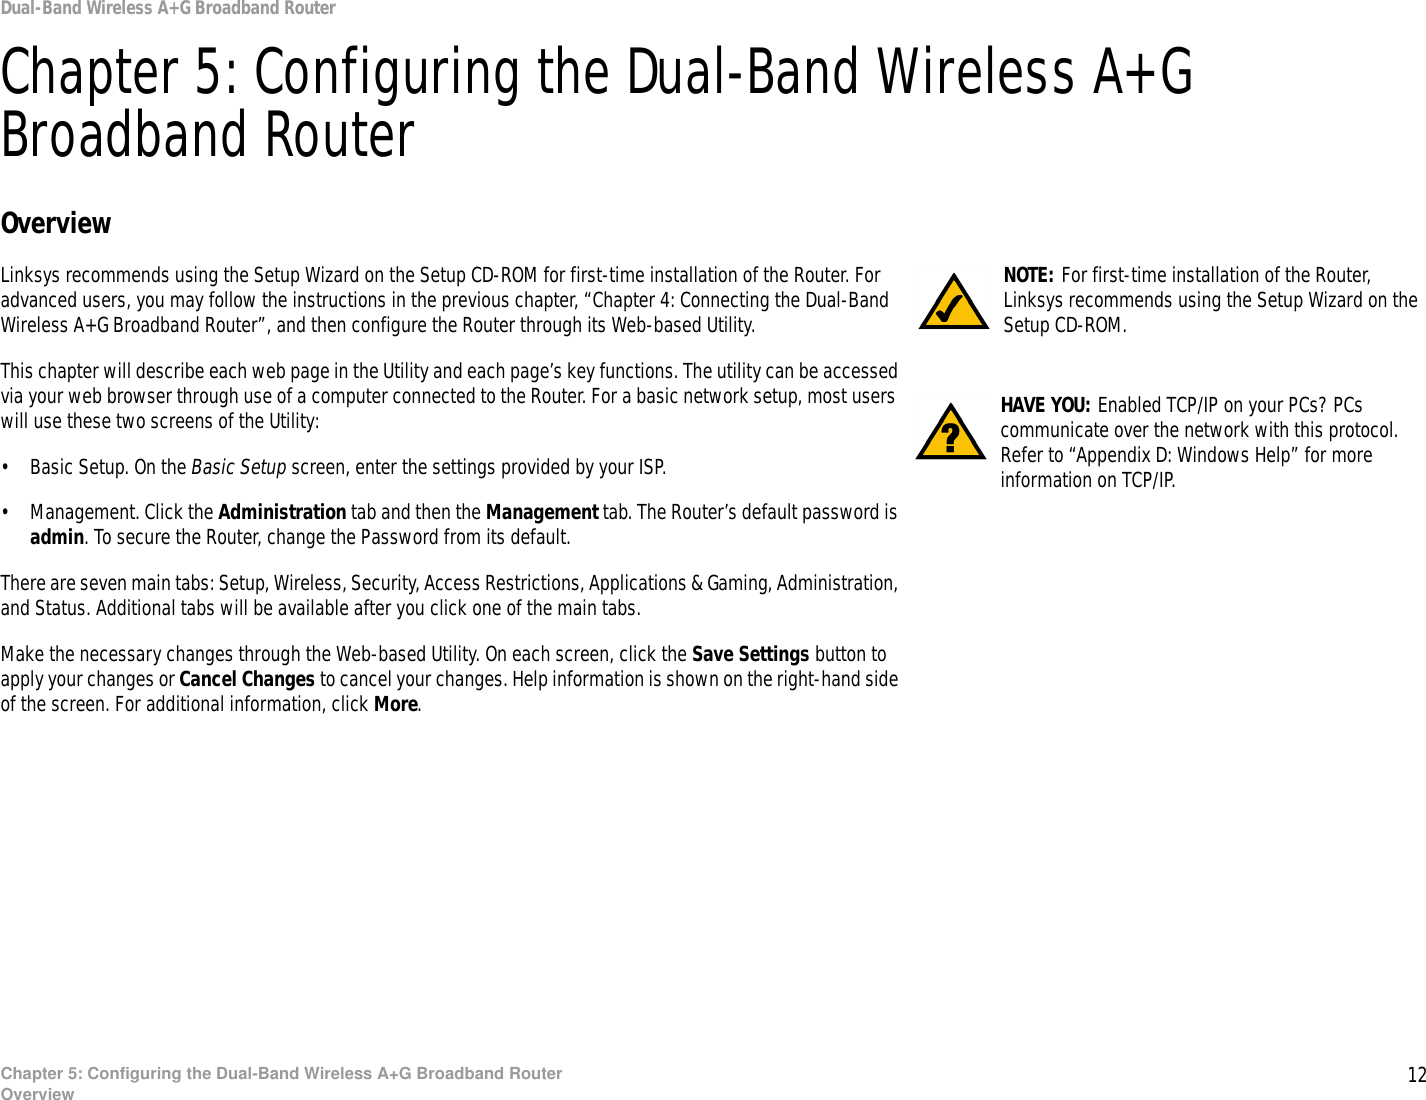 12Chapter 5: Configuring the Dual-Band Wireless A+G Broadband RouterOverviewDual-Band Wireless A+G Broadband RouterChapter 5: Configuring the Dual-Band Wireless A+G Broadband RouterOverviewLinksys recommends using the Setup Wizard on the Setup CD-ROM for first-time installation of the Router. For advanced users, you may follow the instructions in the previous chapter, “Chapter 4: Connecting the Dual-Band Wireless A+G Broadband Router”, and then configure the Router through its Web-based Utility.This chapter will describe each web page in the Utility and each page’s key functions. The utility can be accessed via your web browser through use of a computer connected to the Router. For a basic network setup, most users will use these two screens of the Utility:• Basic Setup. On the Basic Setup screen, enter the settings provided by your ISP.• Management. Click the Administration tab and then the Management tab. The Router’s default password is admin. To secure the Router, change the Password from its default.There are seven main tabs: Setup, Wireless, Security, Access Restrictions, Applications &amp; Gaming, Administration, and Status. Additional tabs will be available after you click one of the main tabs.Make the necessary changes through the Web-based Utility. On each screen, click the Save Settings button to apply your changes or Cancel Changes to cancel your changes. Help information is shown on the right-hand side of the screen. For additional information, click More.HAVE YOU: Enabled TCP/IP on your PCs? PCs communicate over the network with this protocol. Refer to “Appendix D: Windows Help” for more information on TCP/IP.NOTE: For first-time installation of the Router, Linksys recommends using the Setup Wizard on the Setup CD-ROM.